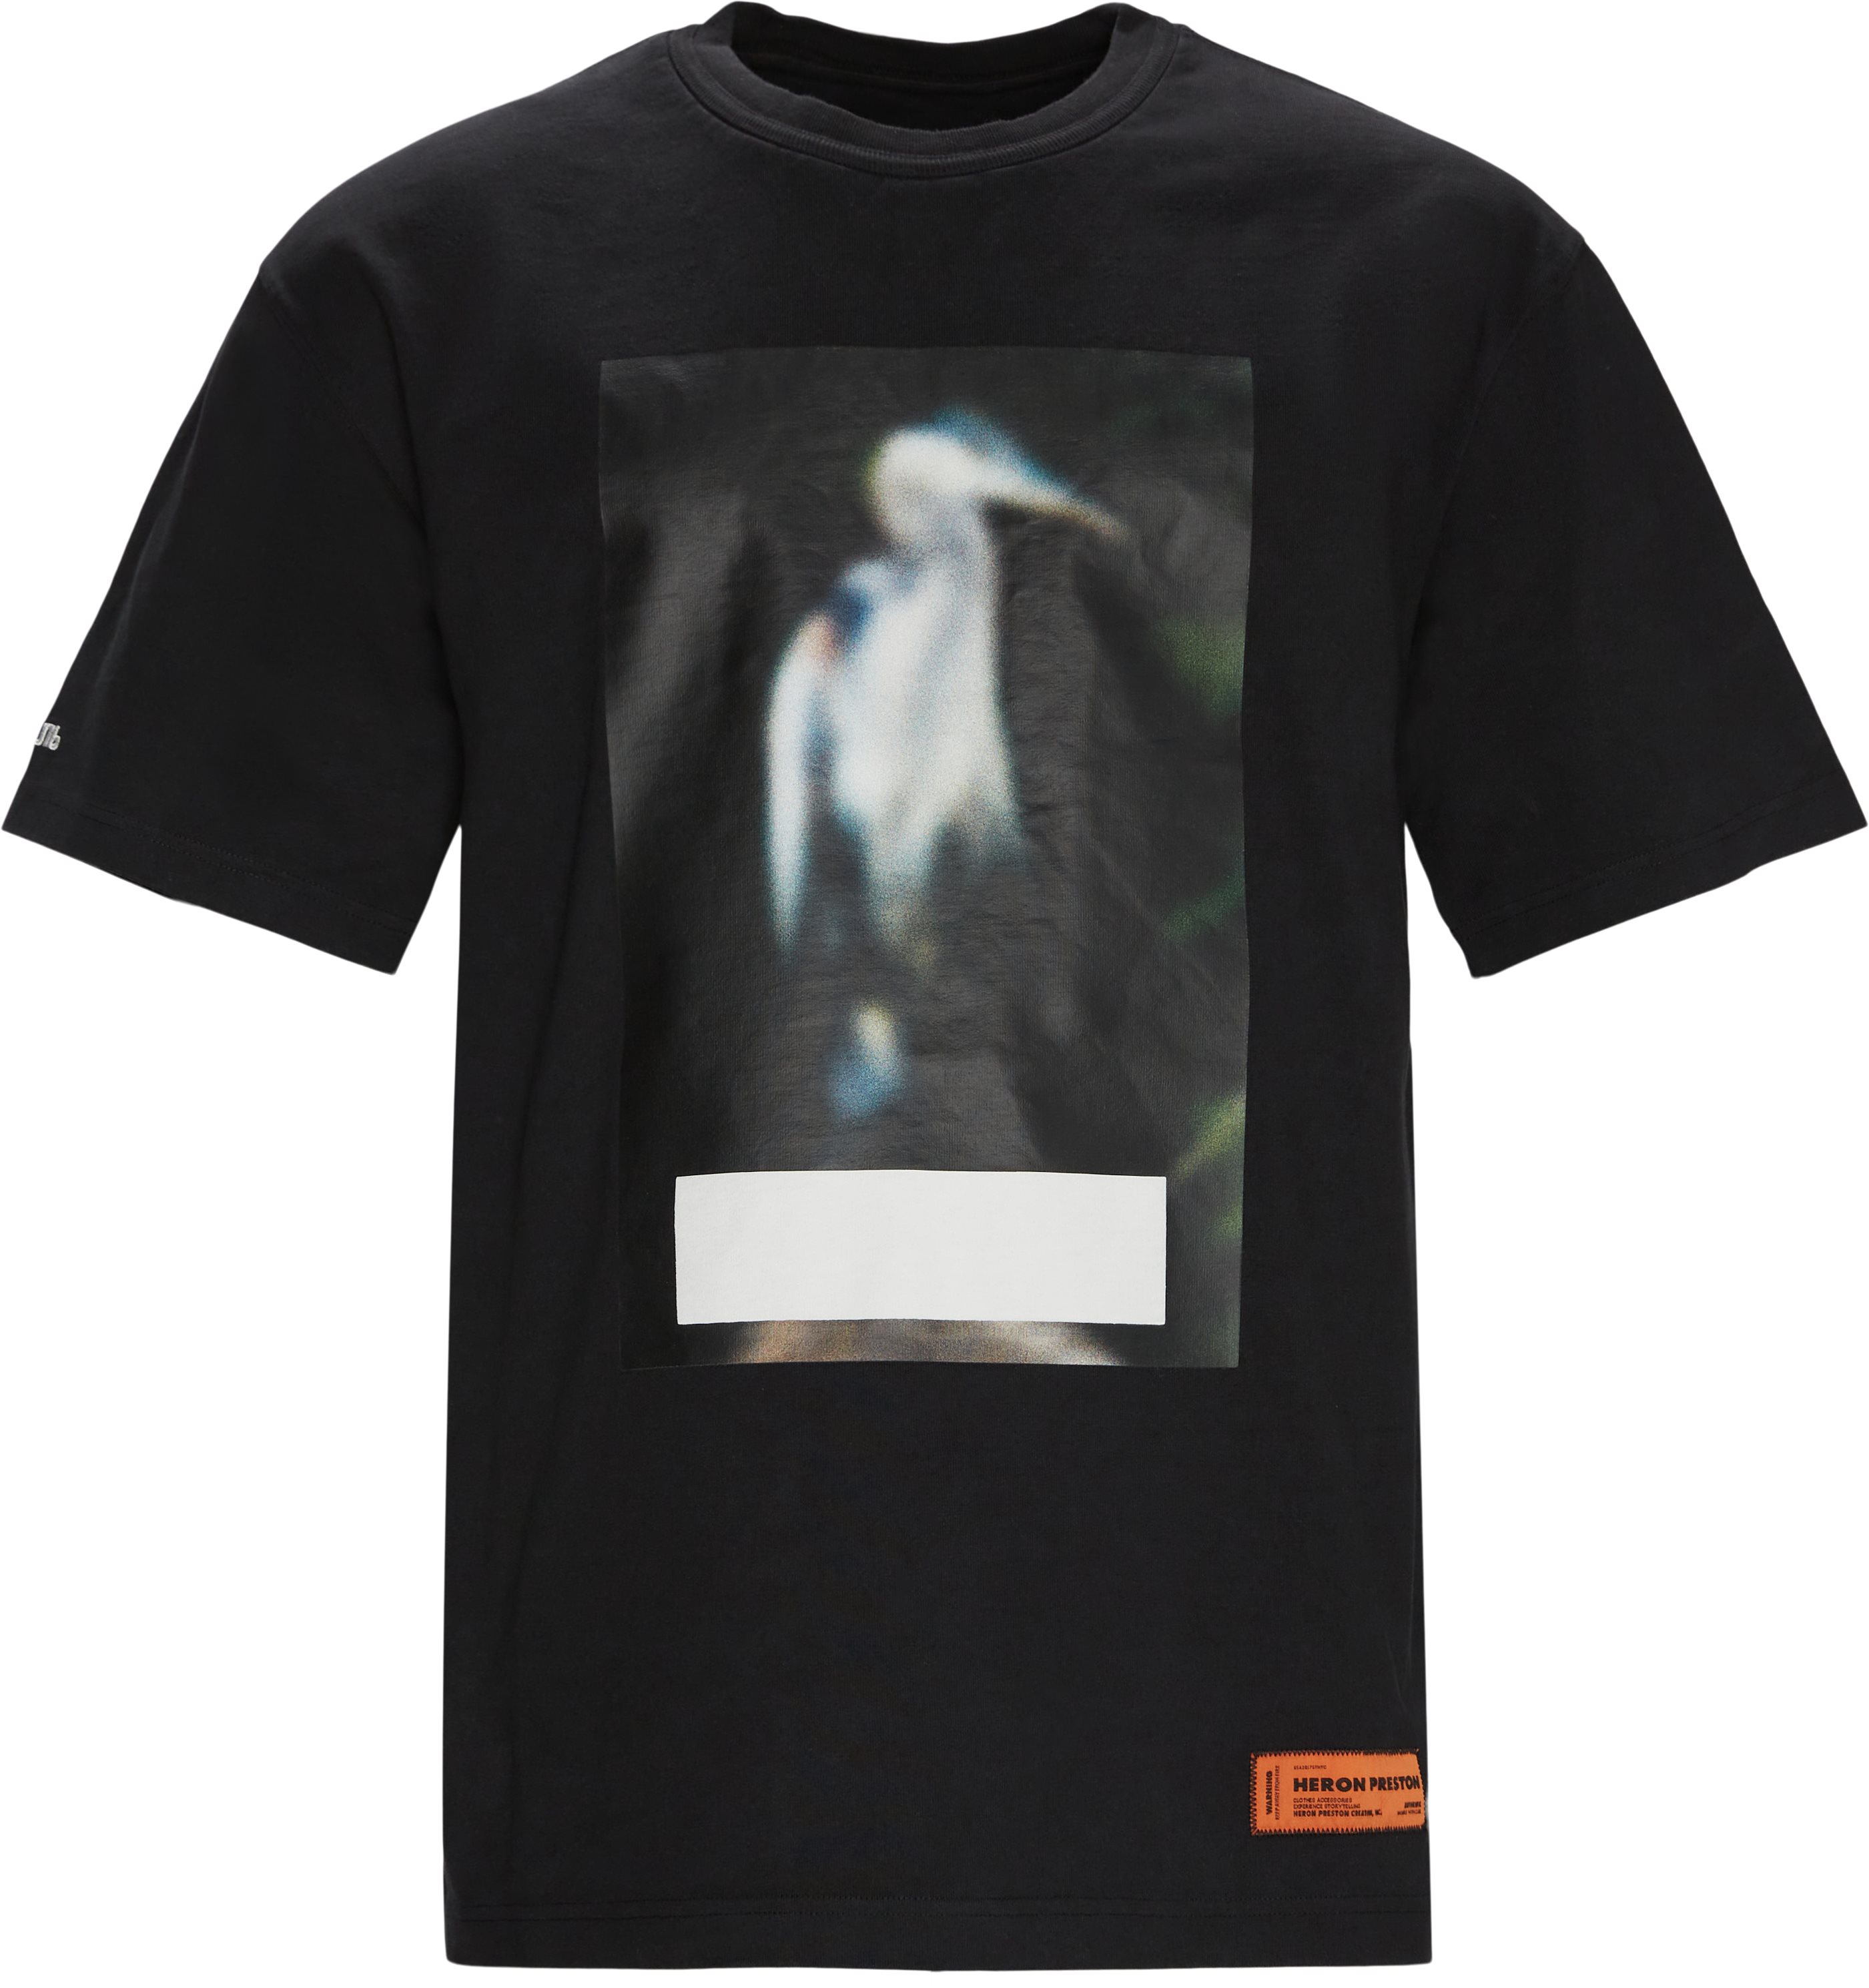 Censored Tee - T-shirts - Oversize fit - Black